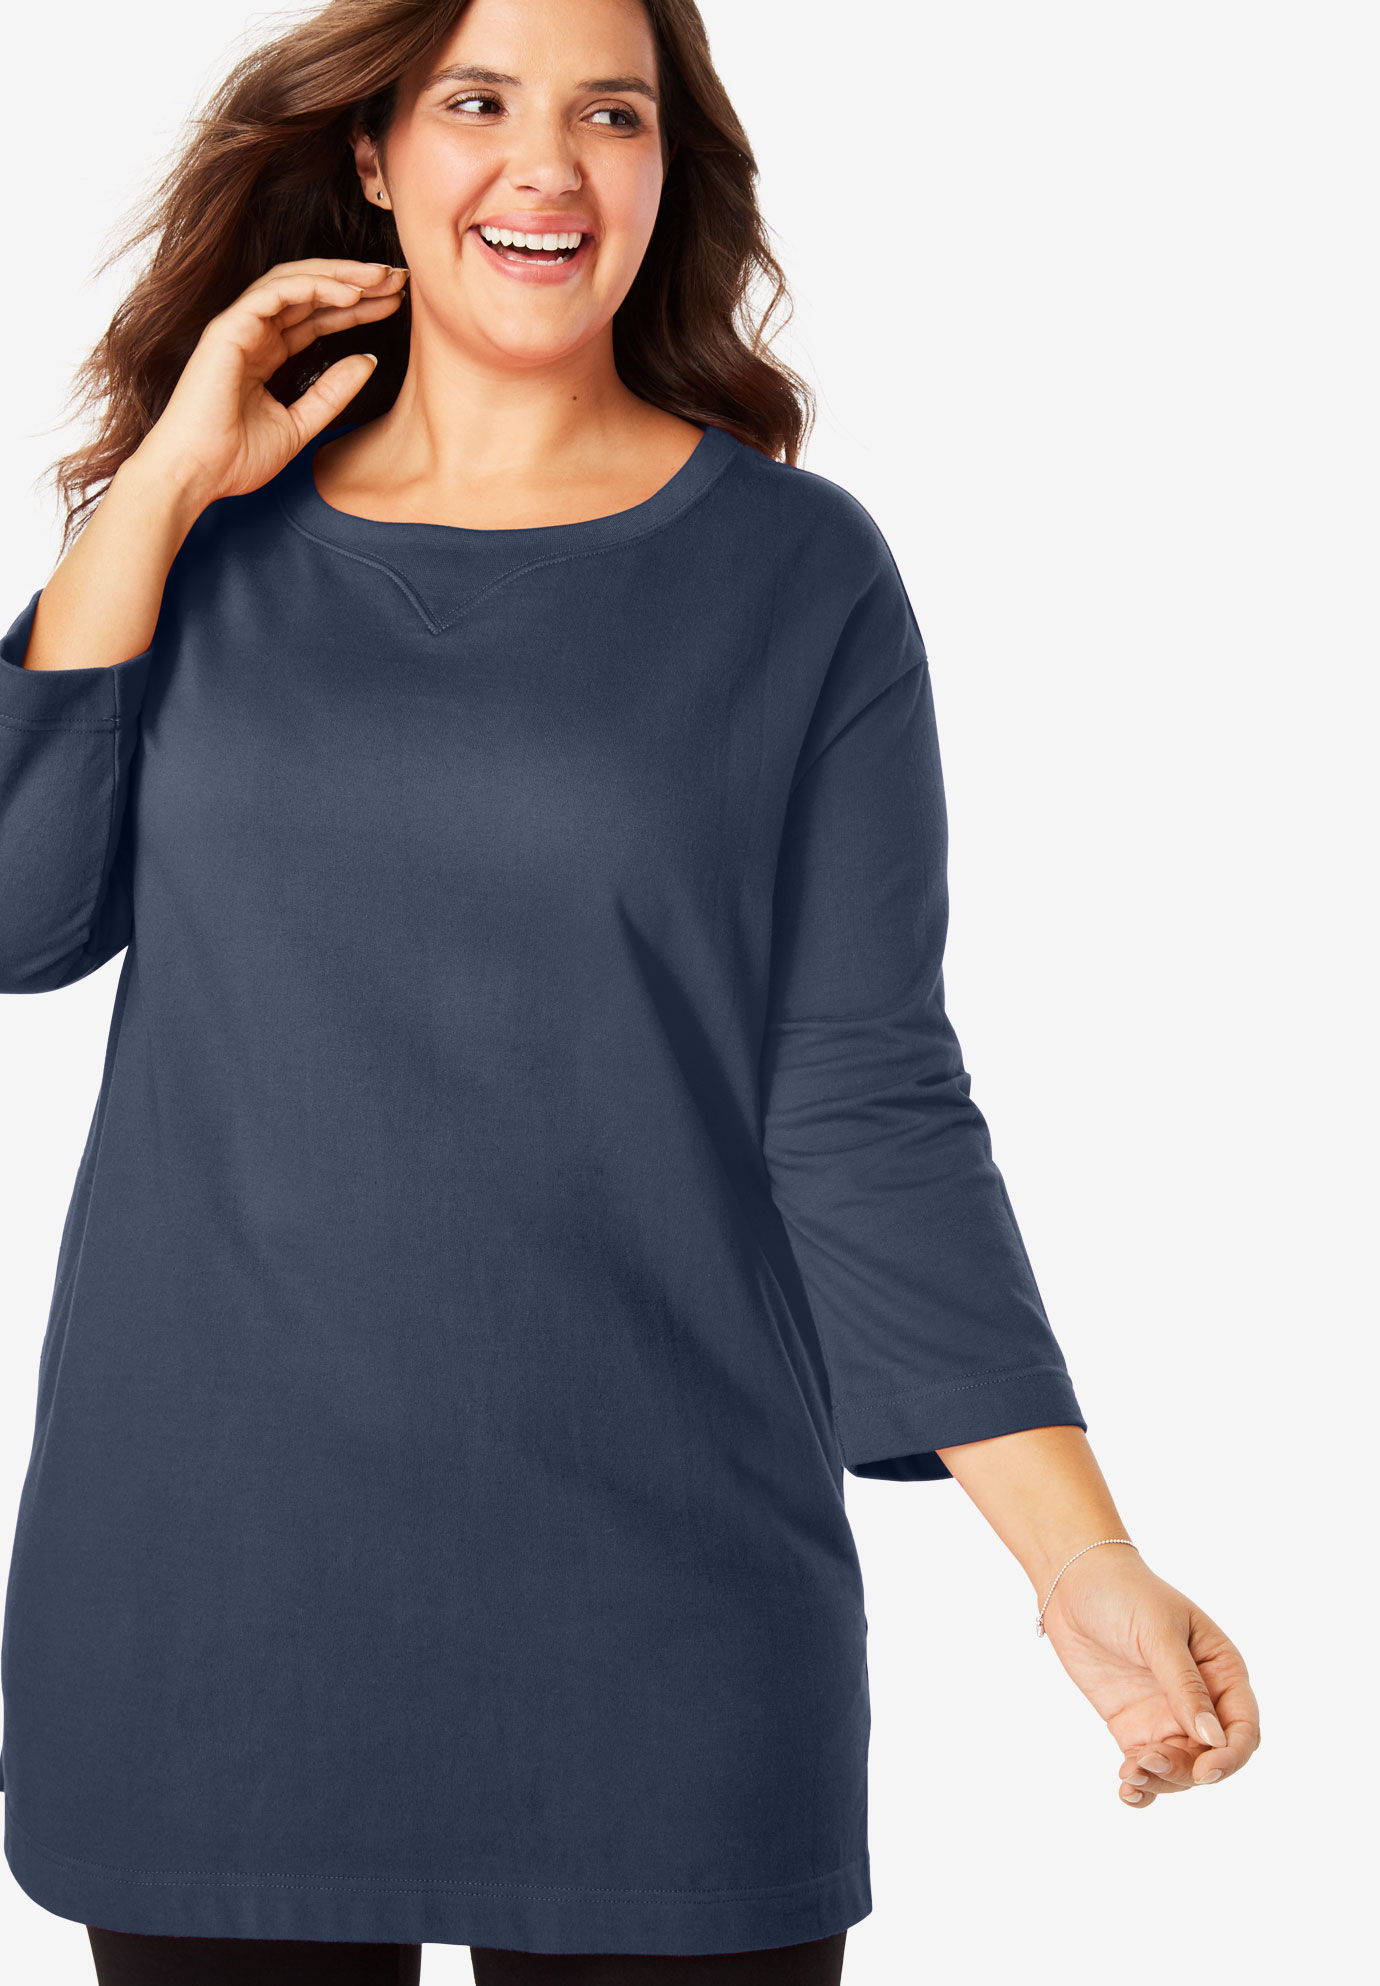 French Terry Pocket Tunic Sweatshirt with Rolled Sleeves | Plus Size ...